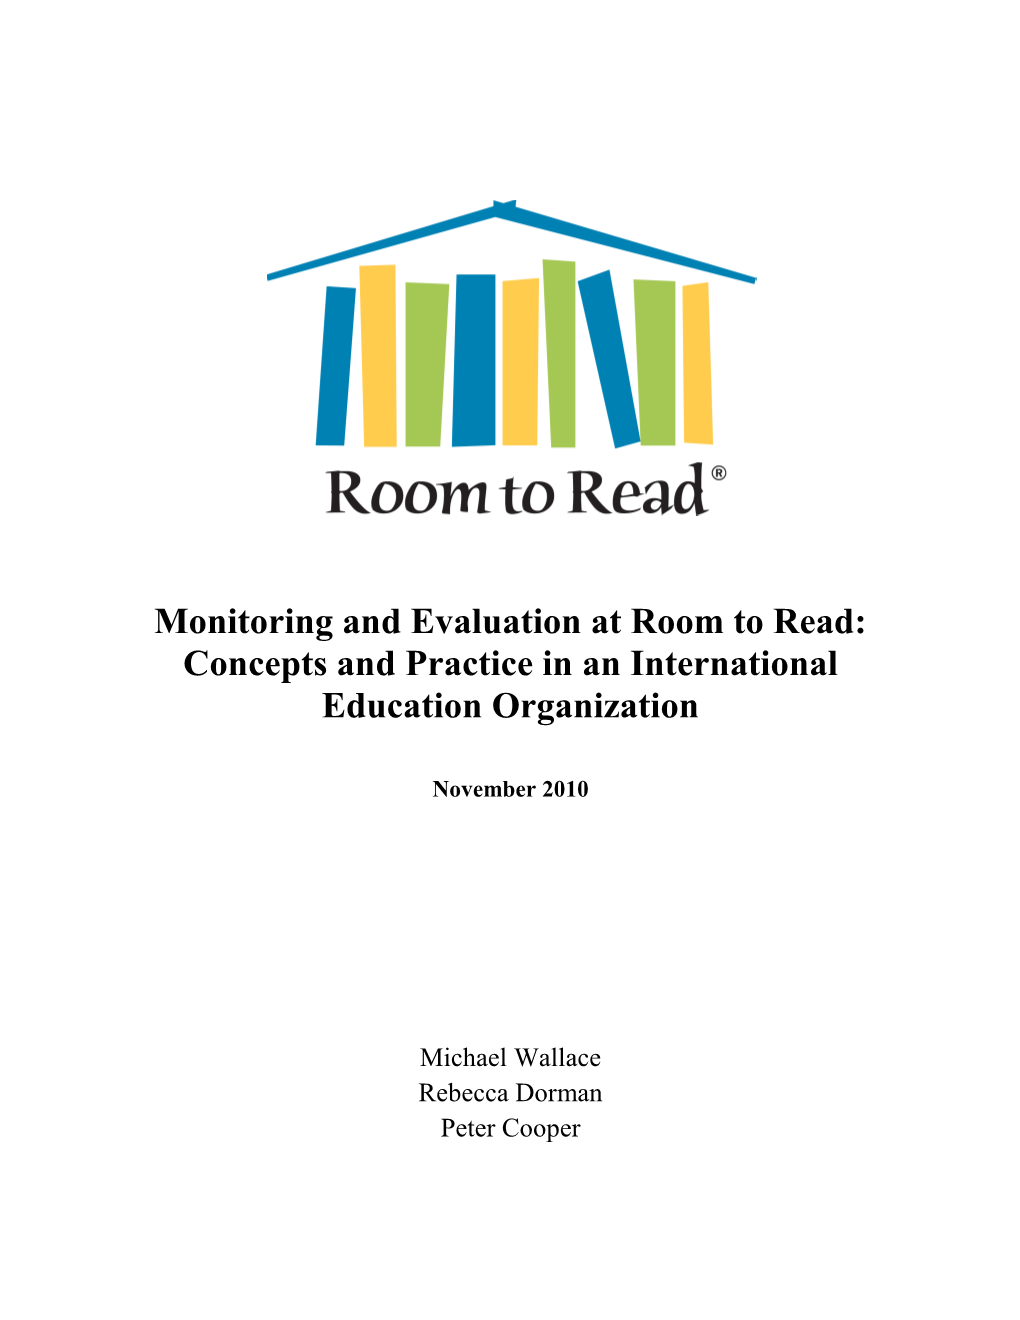 Monitoring and Evaluation at Room to Read: Concepts and Practice in an International Education Organization